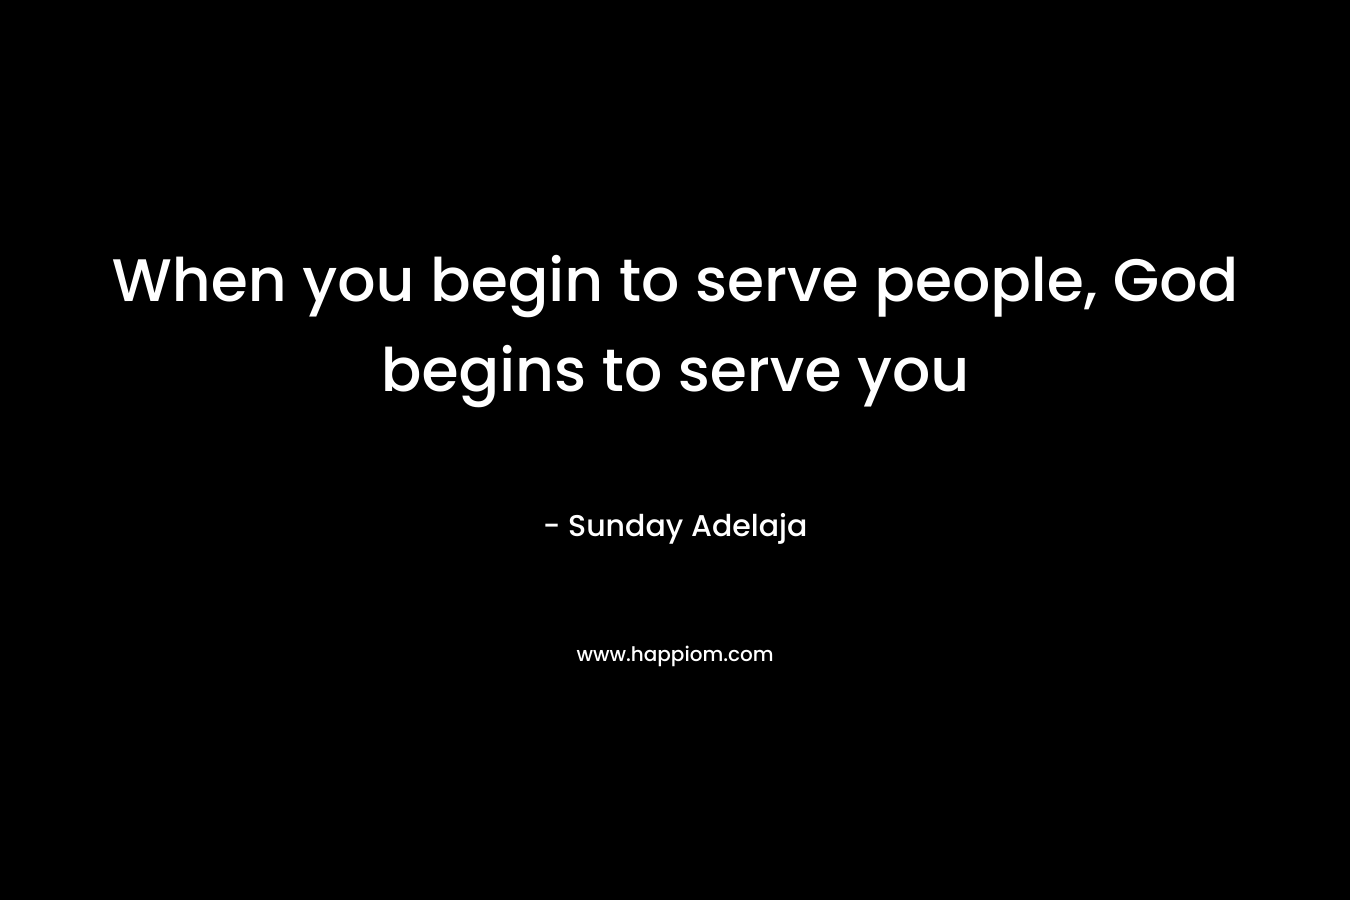 When you begin to serve people, God begins to serve you